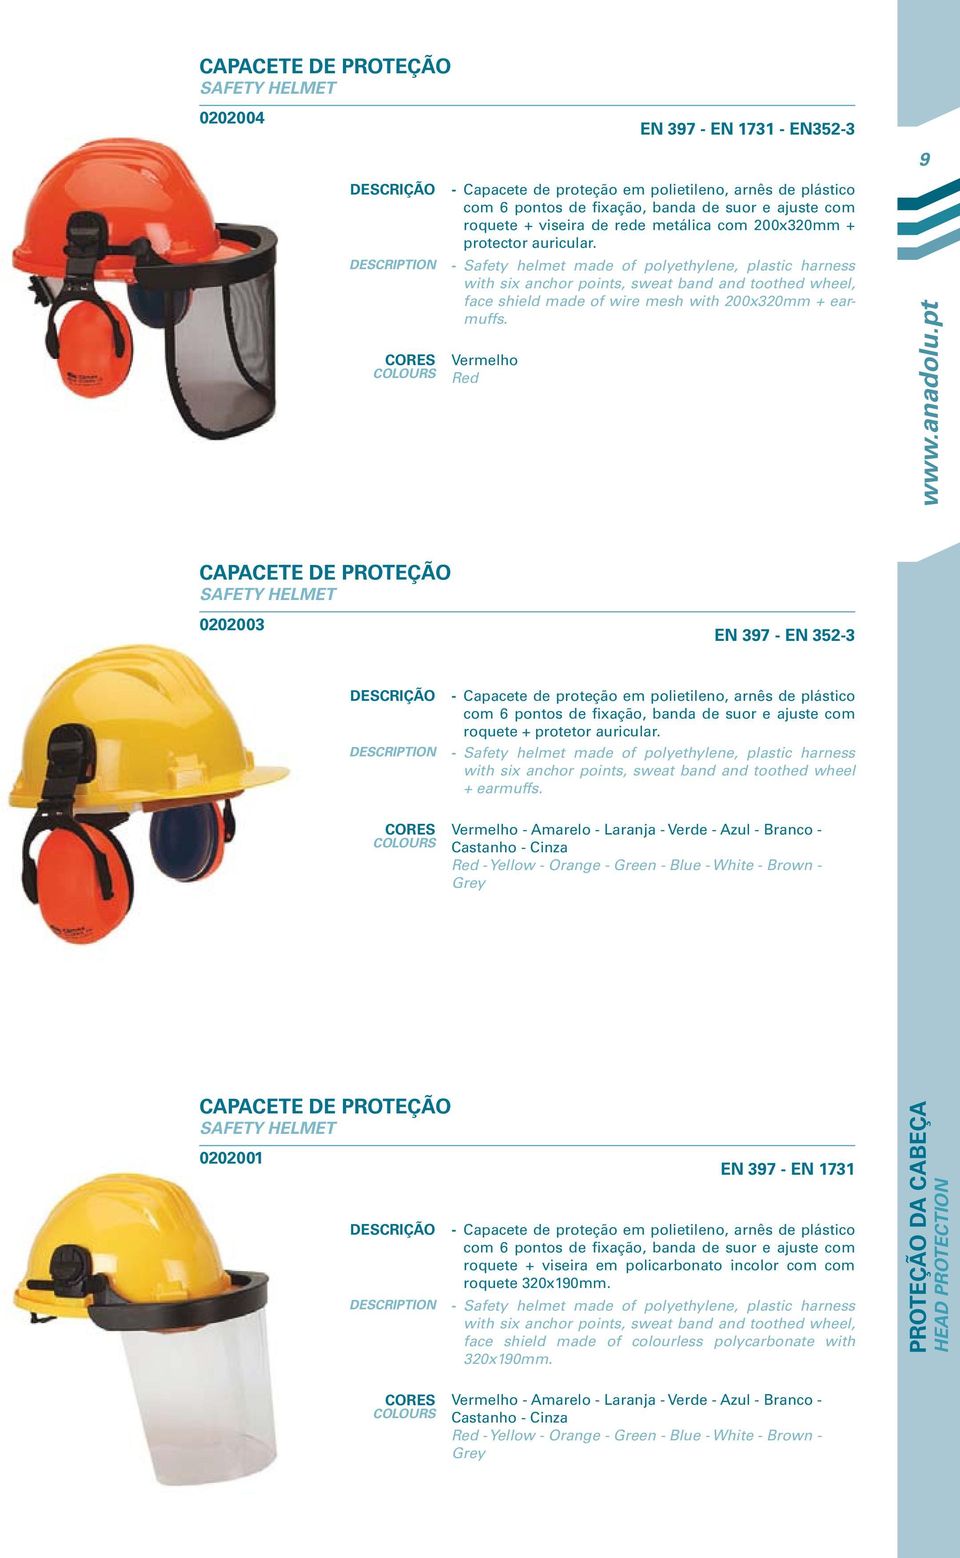 Safety helmet made of polyethylene, plastic harness with six anchor points, sweat band and toothed wheel, face shield made of wire mesh with 200x320mm + earmuffs. Vermelho Red www.anadolu.